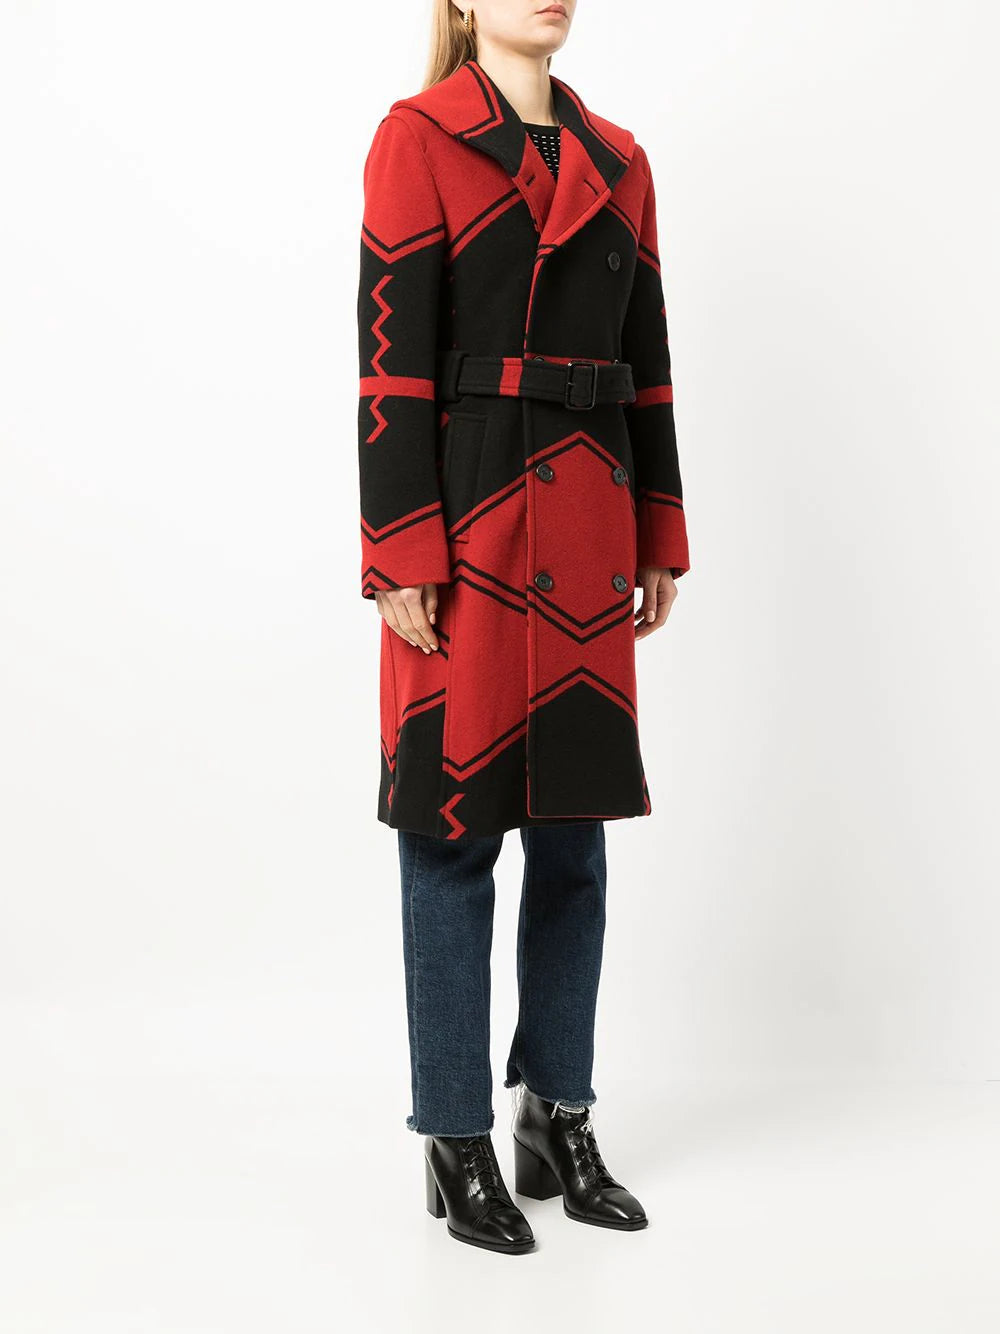 POLO RALPH LAUREN  Red Wool Infused Overcoat Veronique Luxury Collections